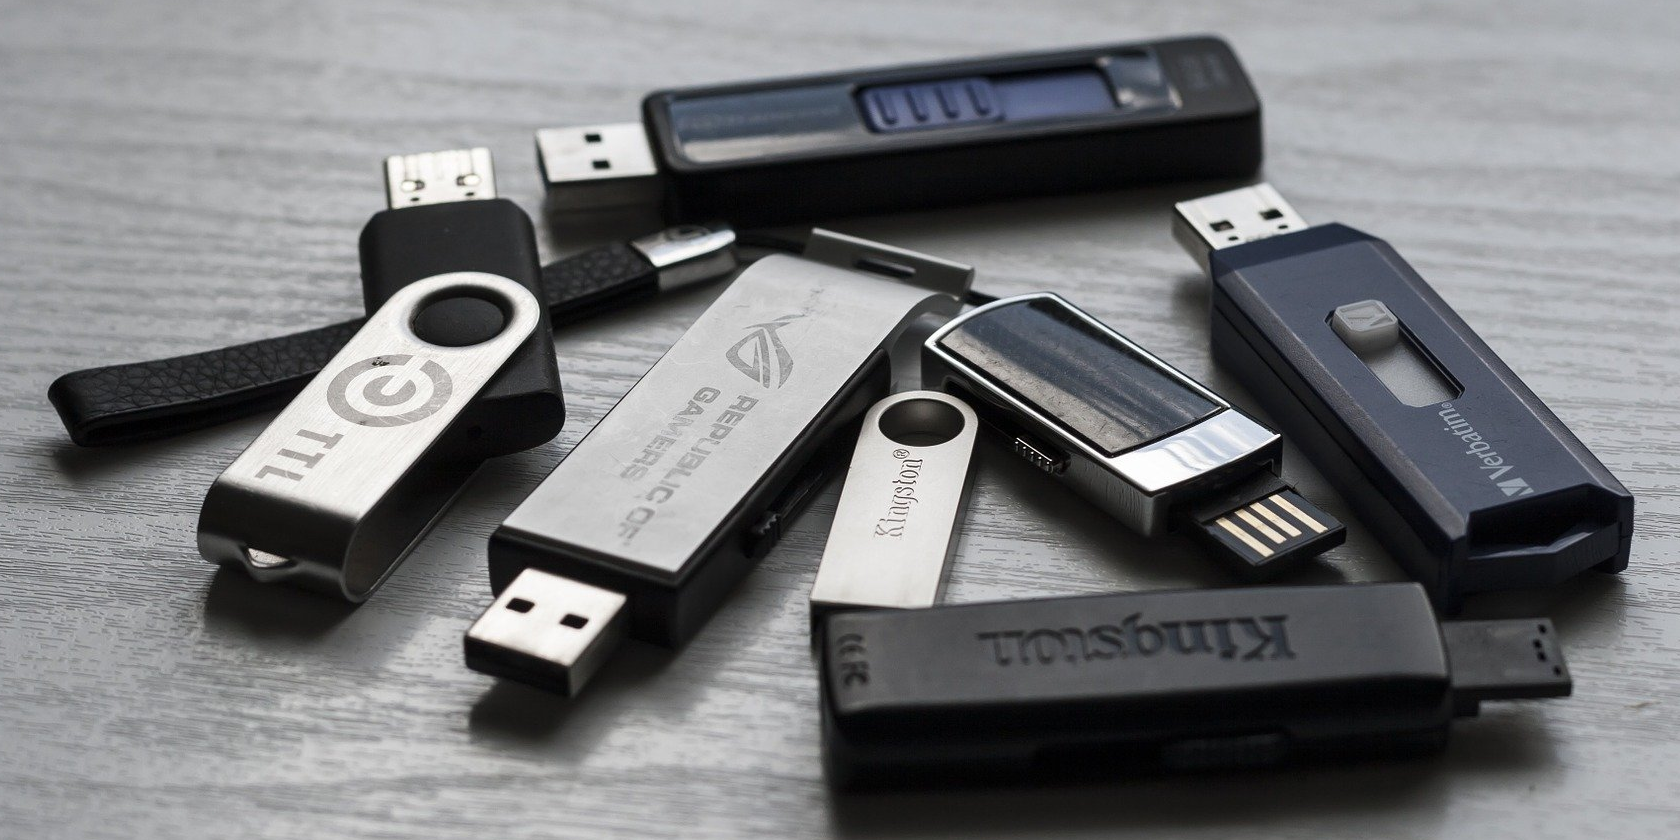 usb 3 transfer rate for thumb drive